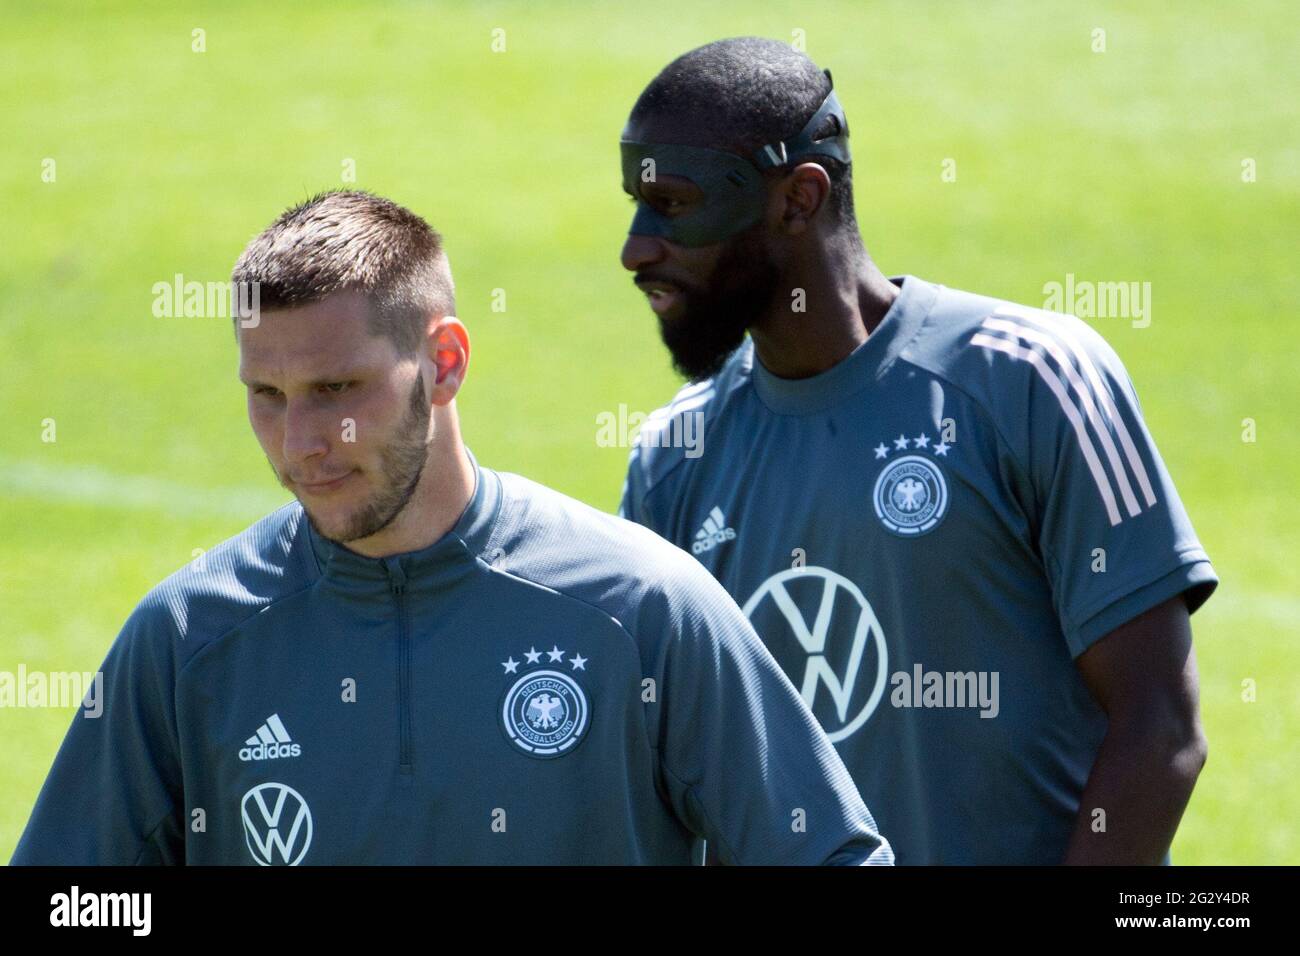 Herzogenaurach, Germany. 13th June, 2021. Football, European Championship, Group F, Germany, training at the Adi Dassler sports ground. Germany's Niklas Süle (l) and Antonio Rüdiger are on the pitch. Credit: Federico Gambarini/dpa/Alamy Live News Stock Photo